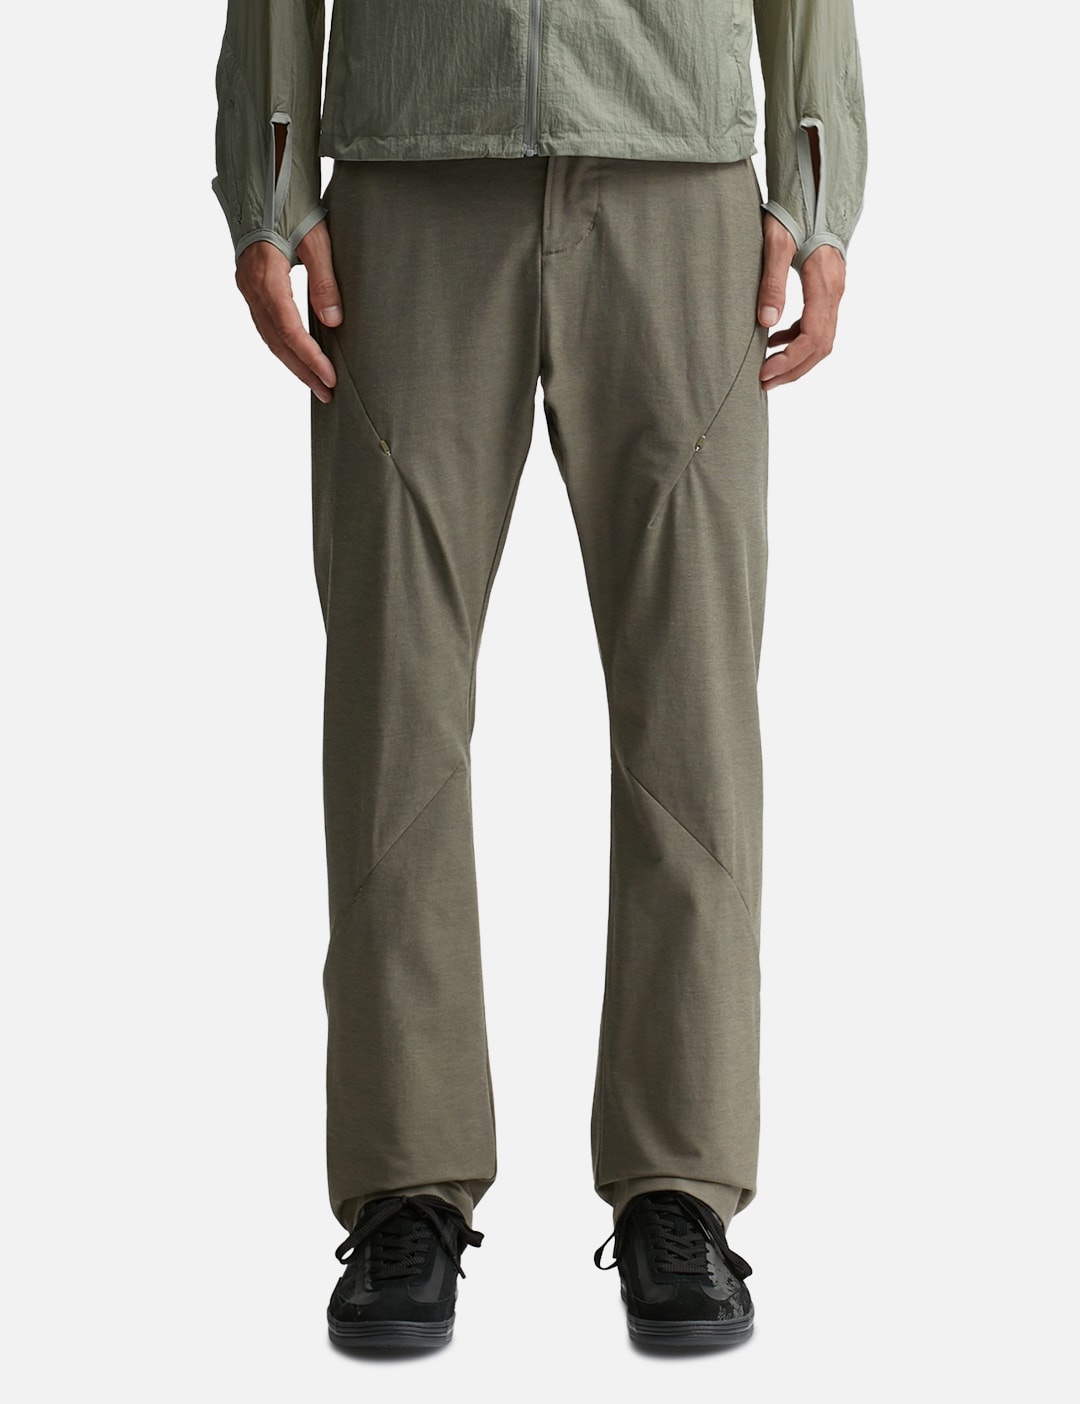 5.1 TECHNICAL PANTS RIGHT - 4